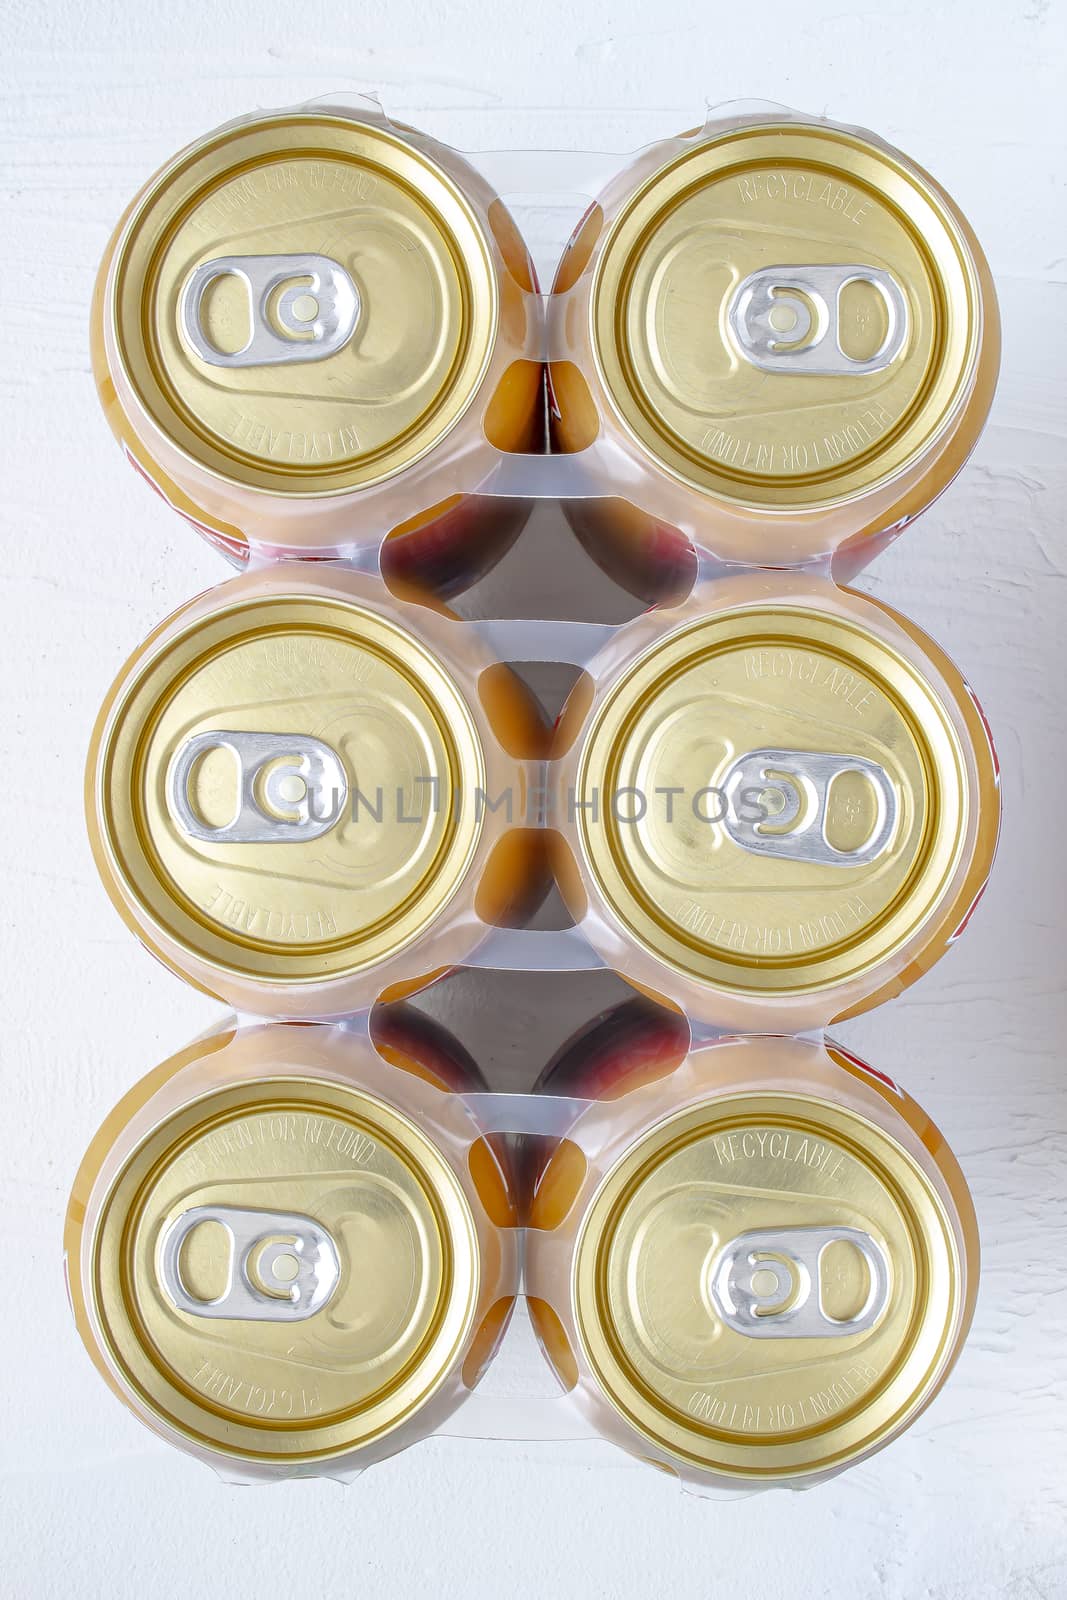 Top view of a golden can six pack of beer